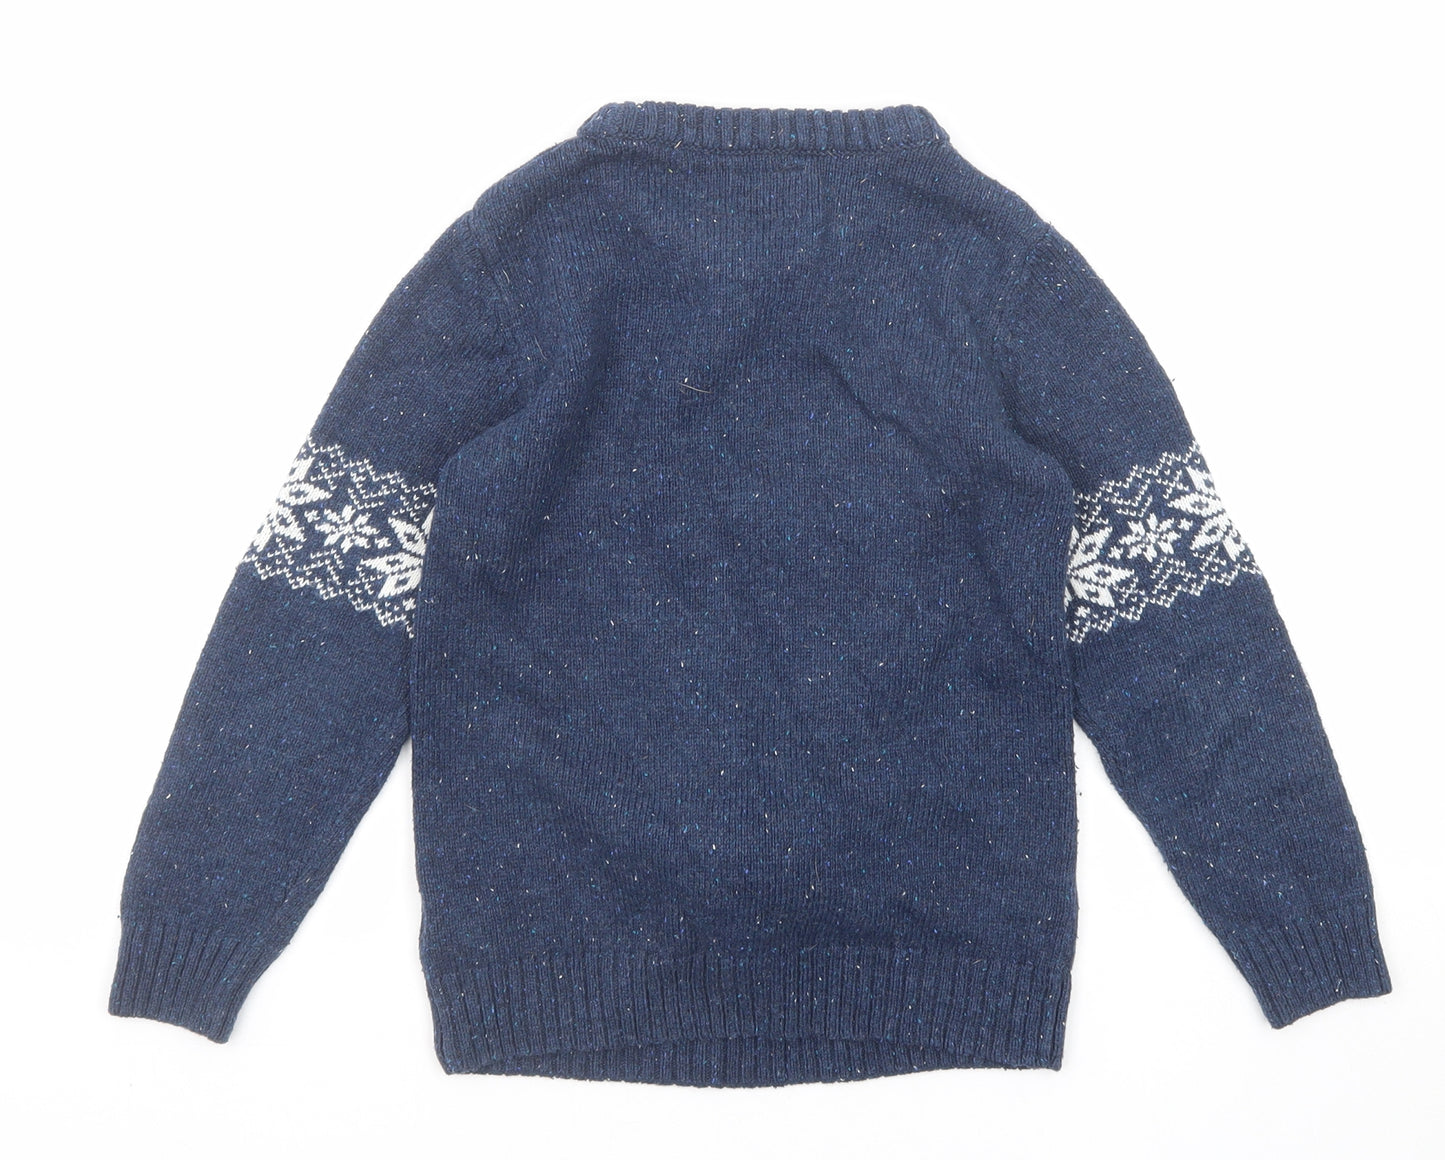 NEXT Boys Blue Round Neck Acrylic Pullover Jumper Size 7 Years Pullover - Reindeer Christmas